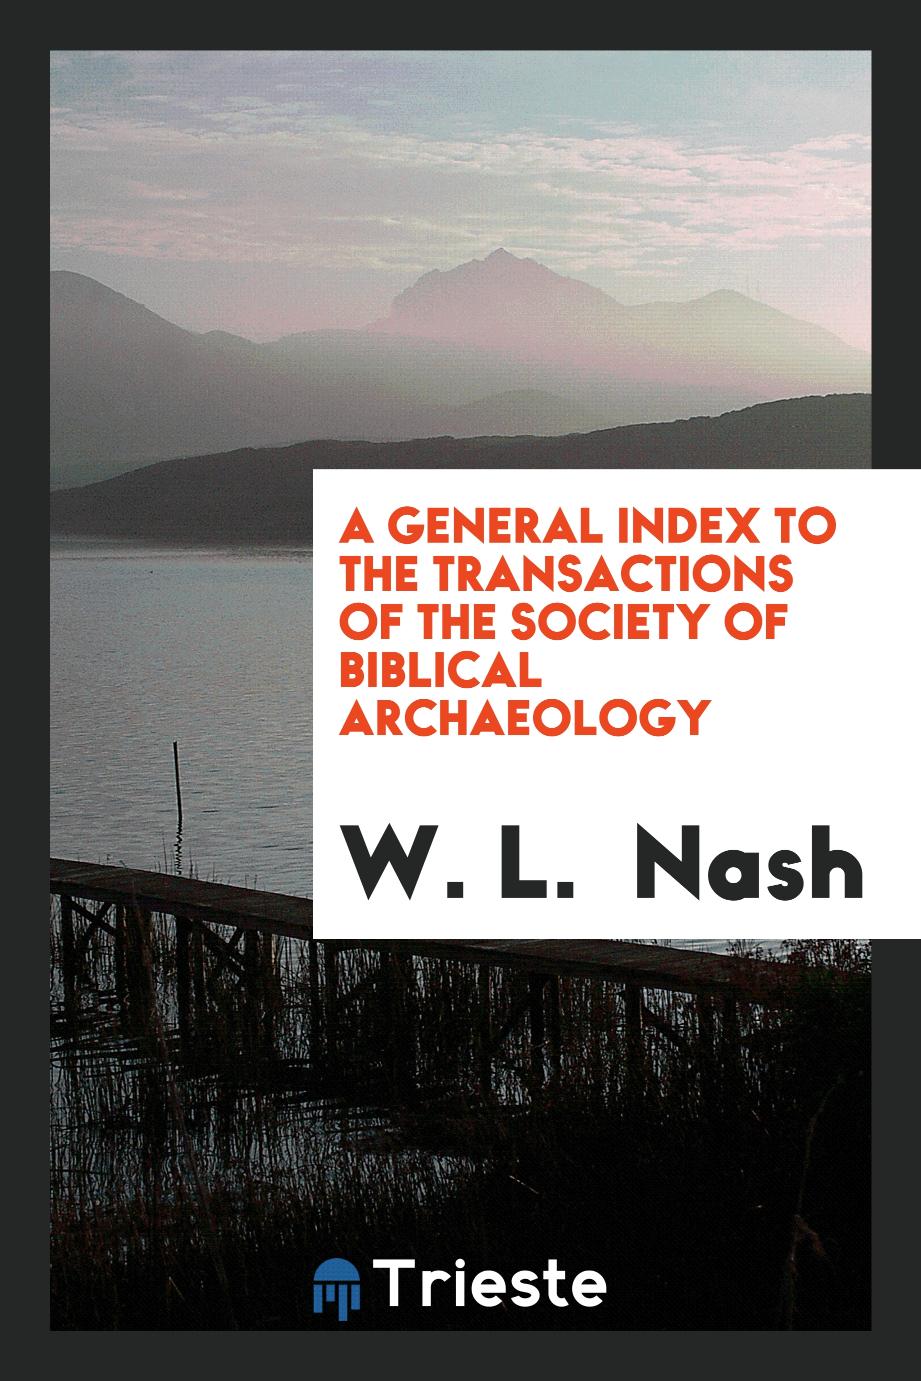 A General Index to the Transactions of the Society of Biblical Archaeology